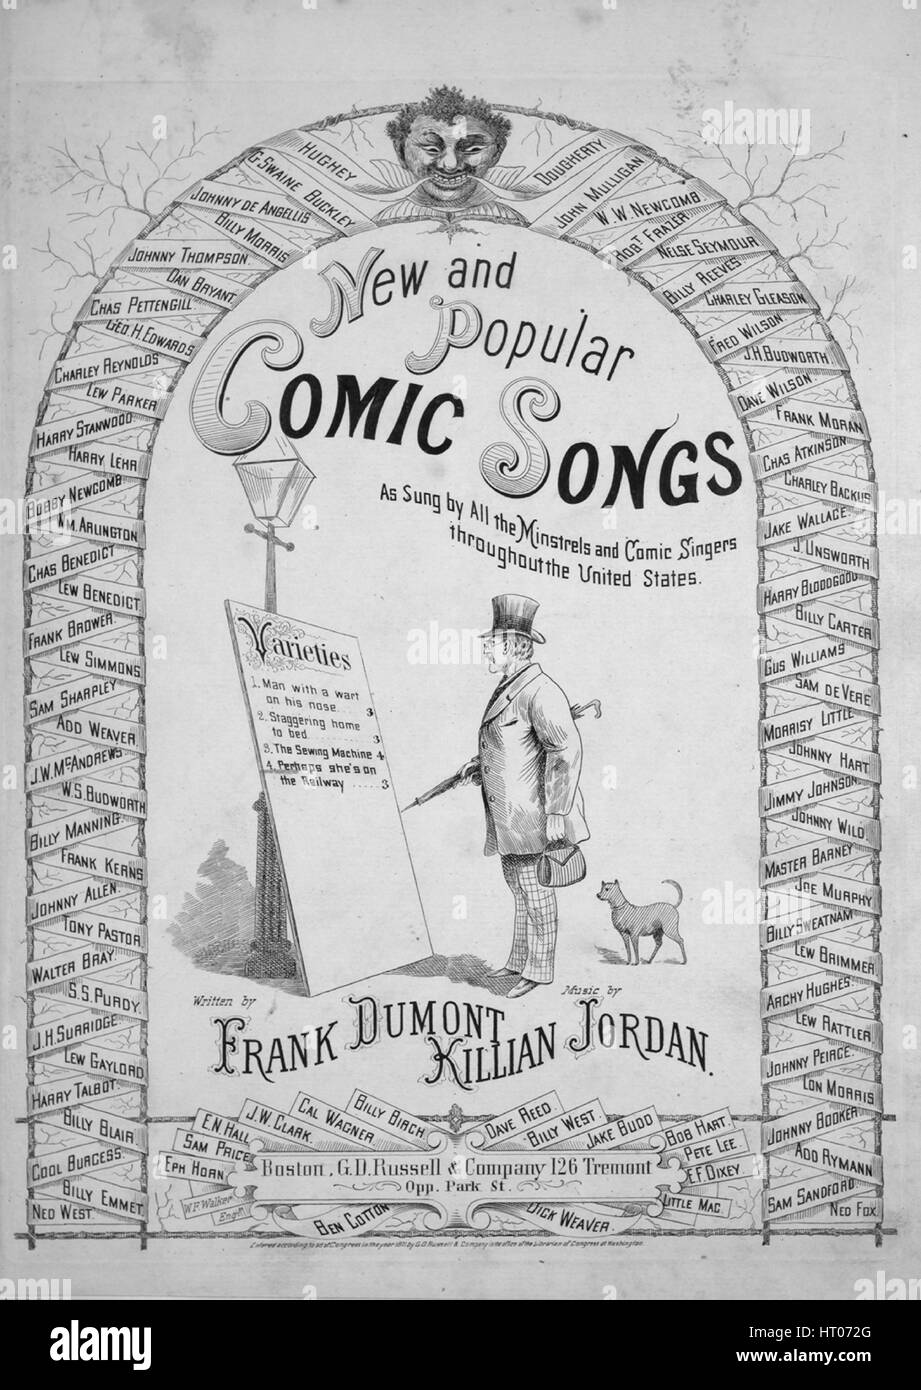 Sheet music cover image of the song 'New and Popular Comic Songs No4 Perhaps Shes on the Railway', with original authorship notes reading 'Written by Frank Dumont Music by Killian Jordan', United States, 1871. The publisher is listed as 'G.D. Russell and Company, 126 Tremont, Opp. Park St.', the form of composition is 'strophic with chorus', the instrumentation is 'piano and voice', the first line reads 'Behold in me a wretched man, quite broken down by woe', and the illustration artist is listed as 'None'. Stock Photo